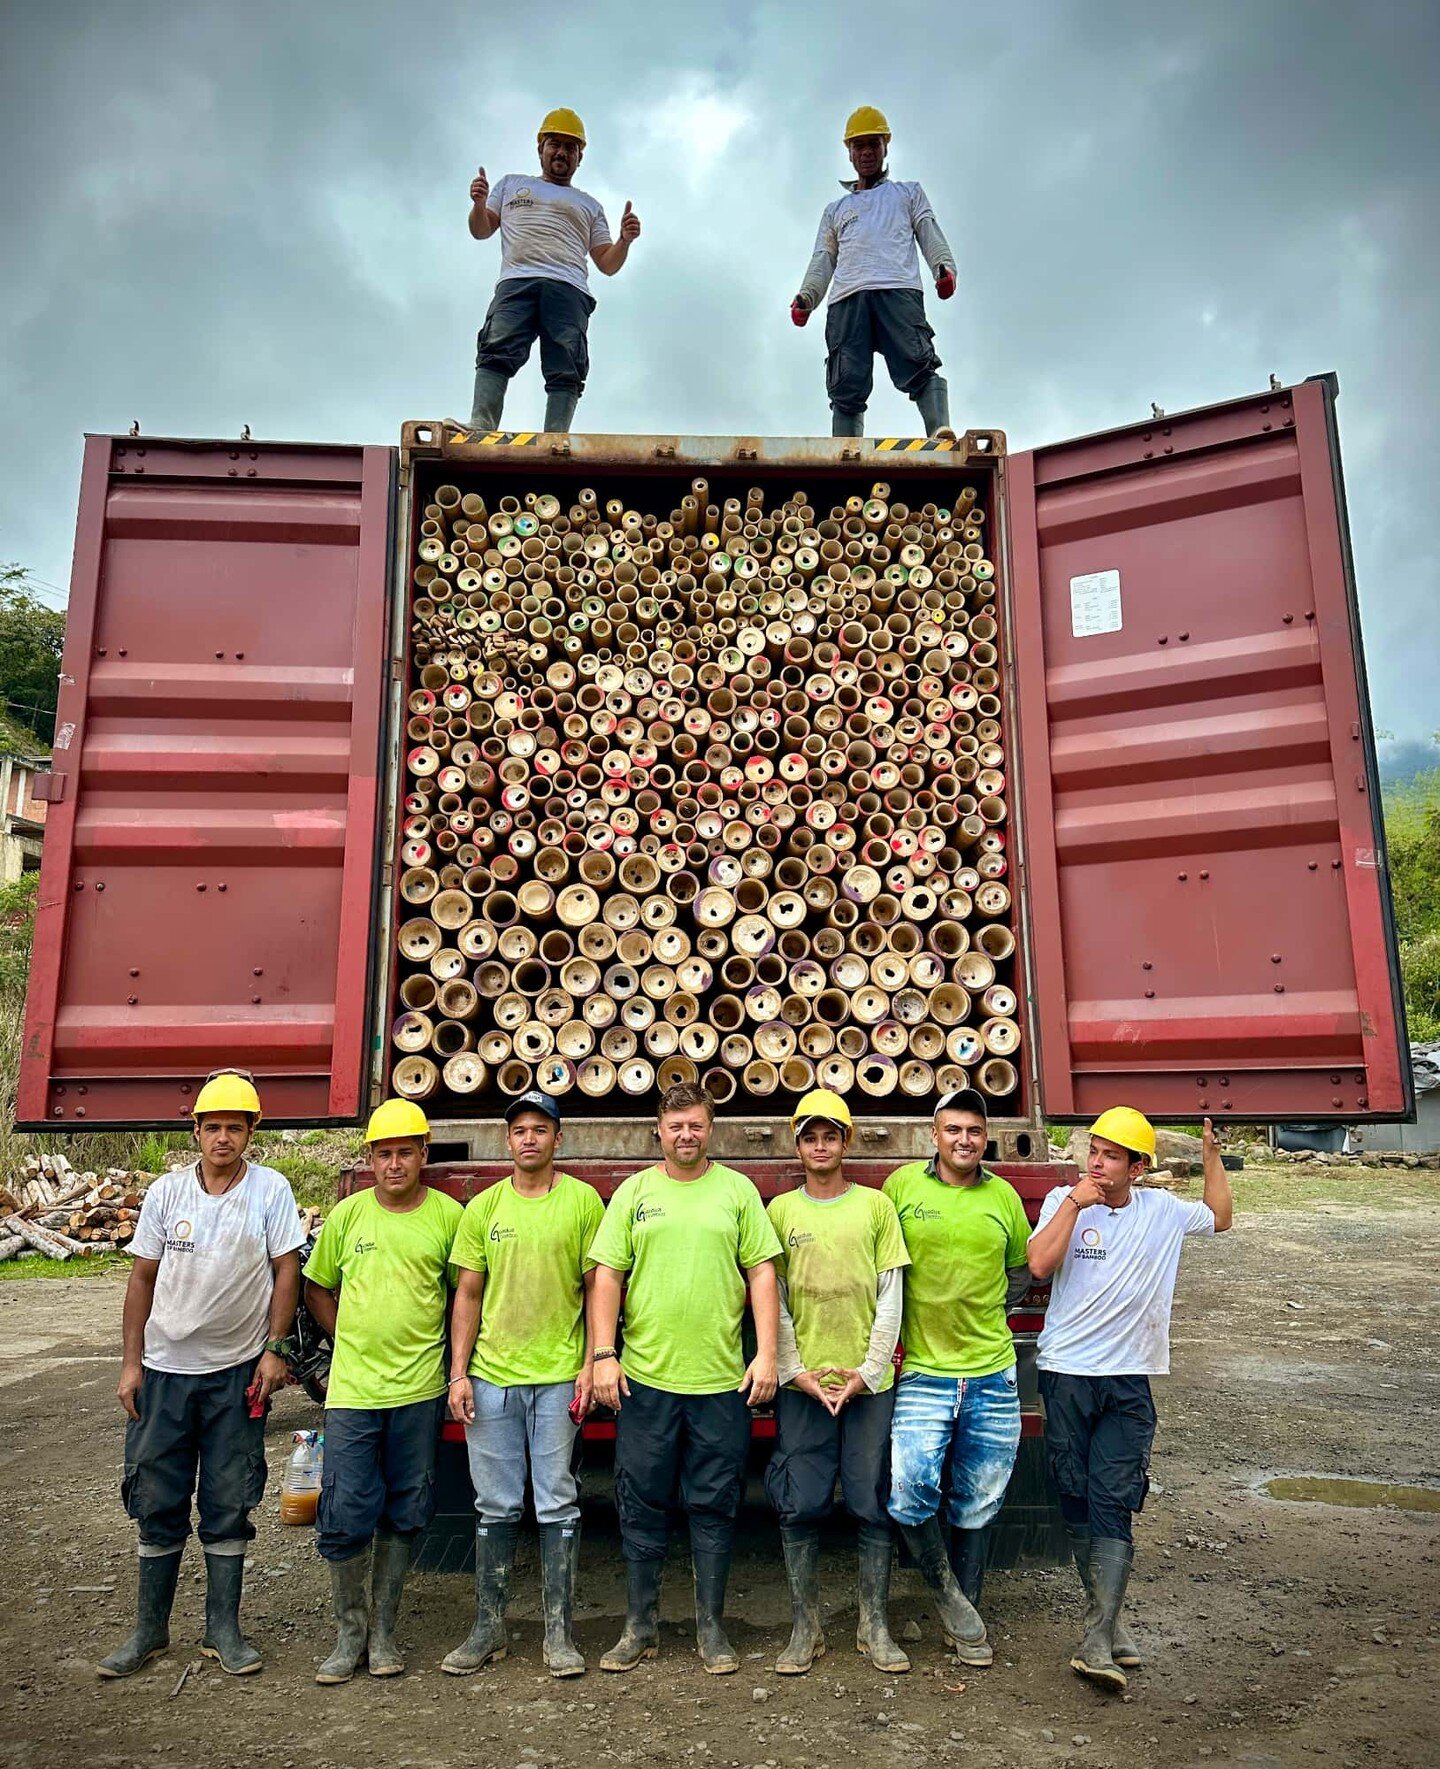 A new and exciting partnership between @mastersofbamboo and @guaduabamboo to bring the world's strongest bamboo to the masses in Europe! 2 containers are on the way to our warehouse in the Netherlands.